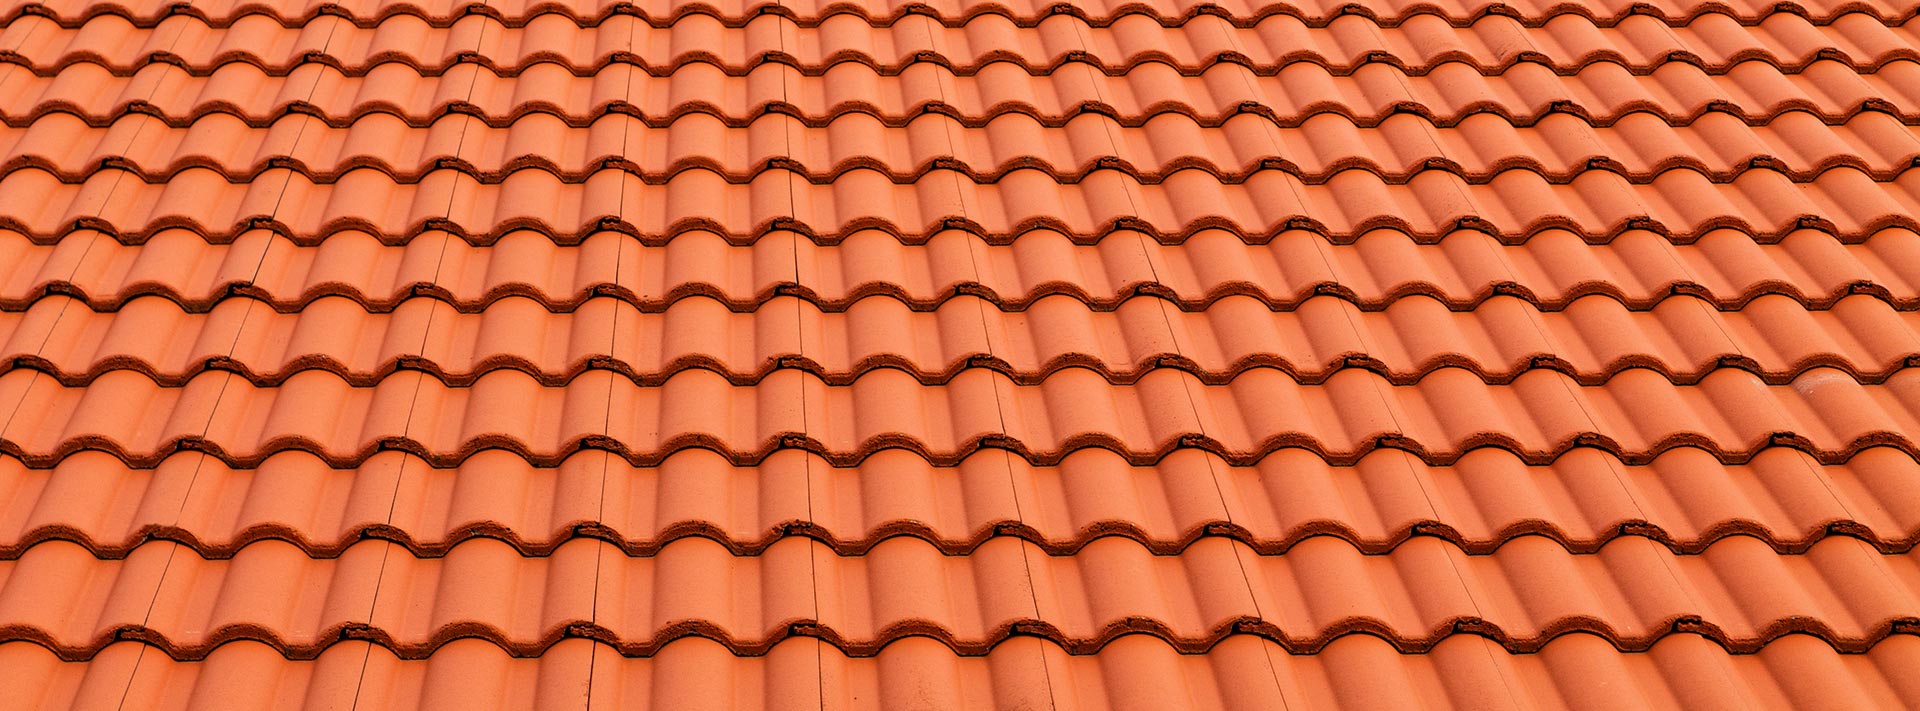 Tiled Roof Repair Maintenance By Roof Building Service